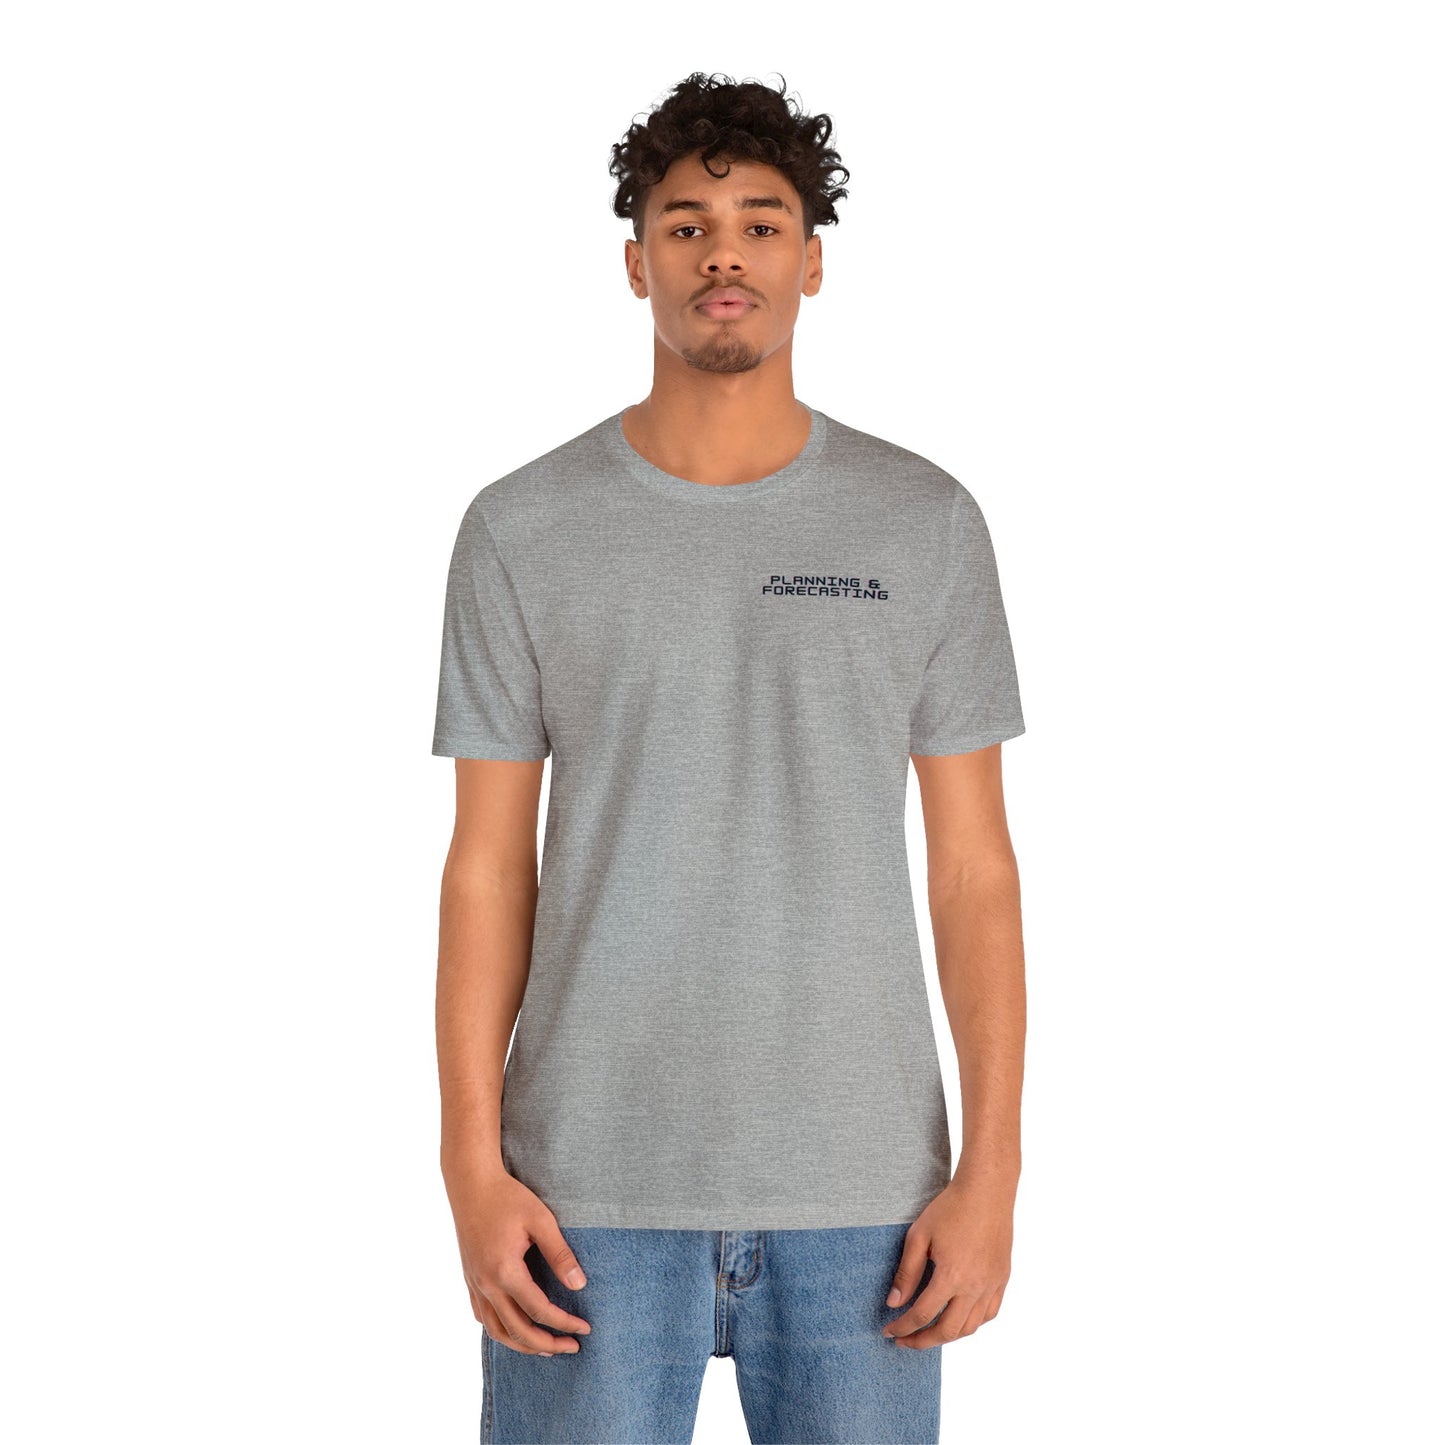 P&F Unisex Jersey Short Sleeve Tee (Loose Fit)